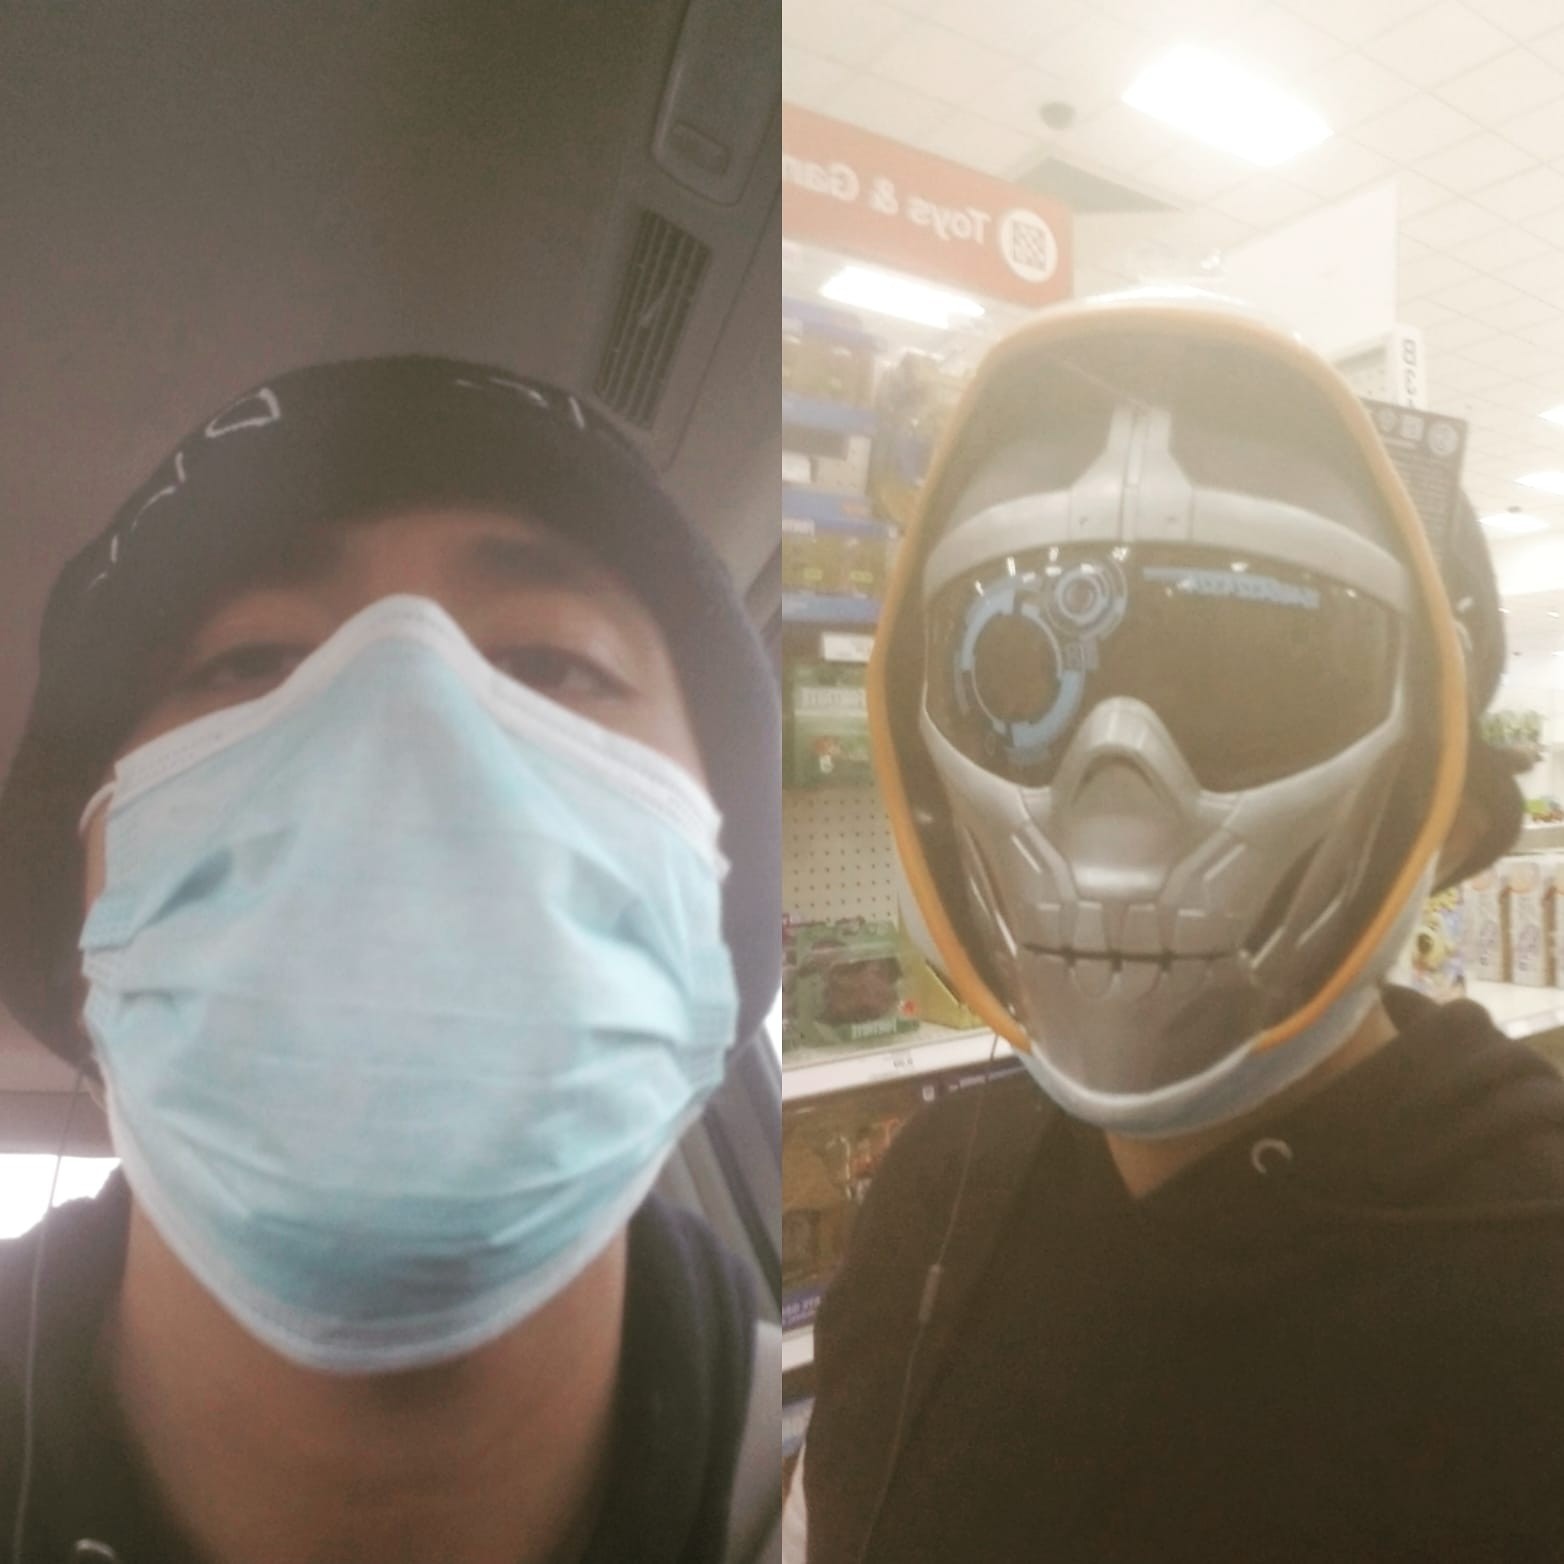 There are two types of ppl during quarantine 
Me: ☠ - meme